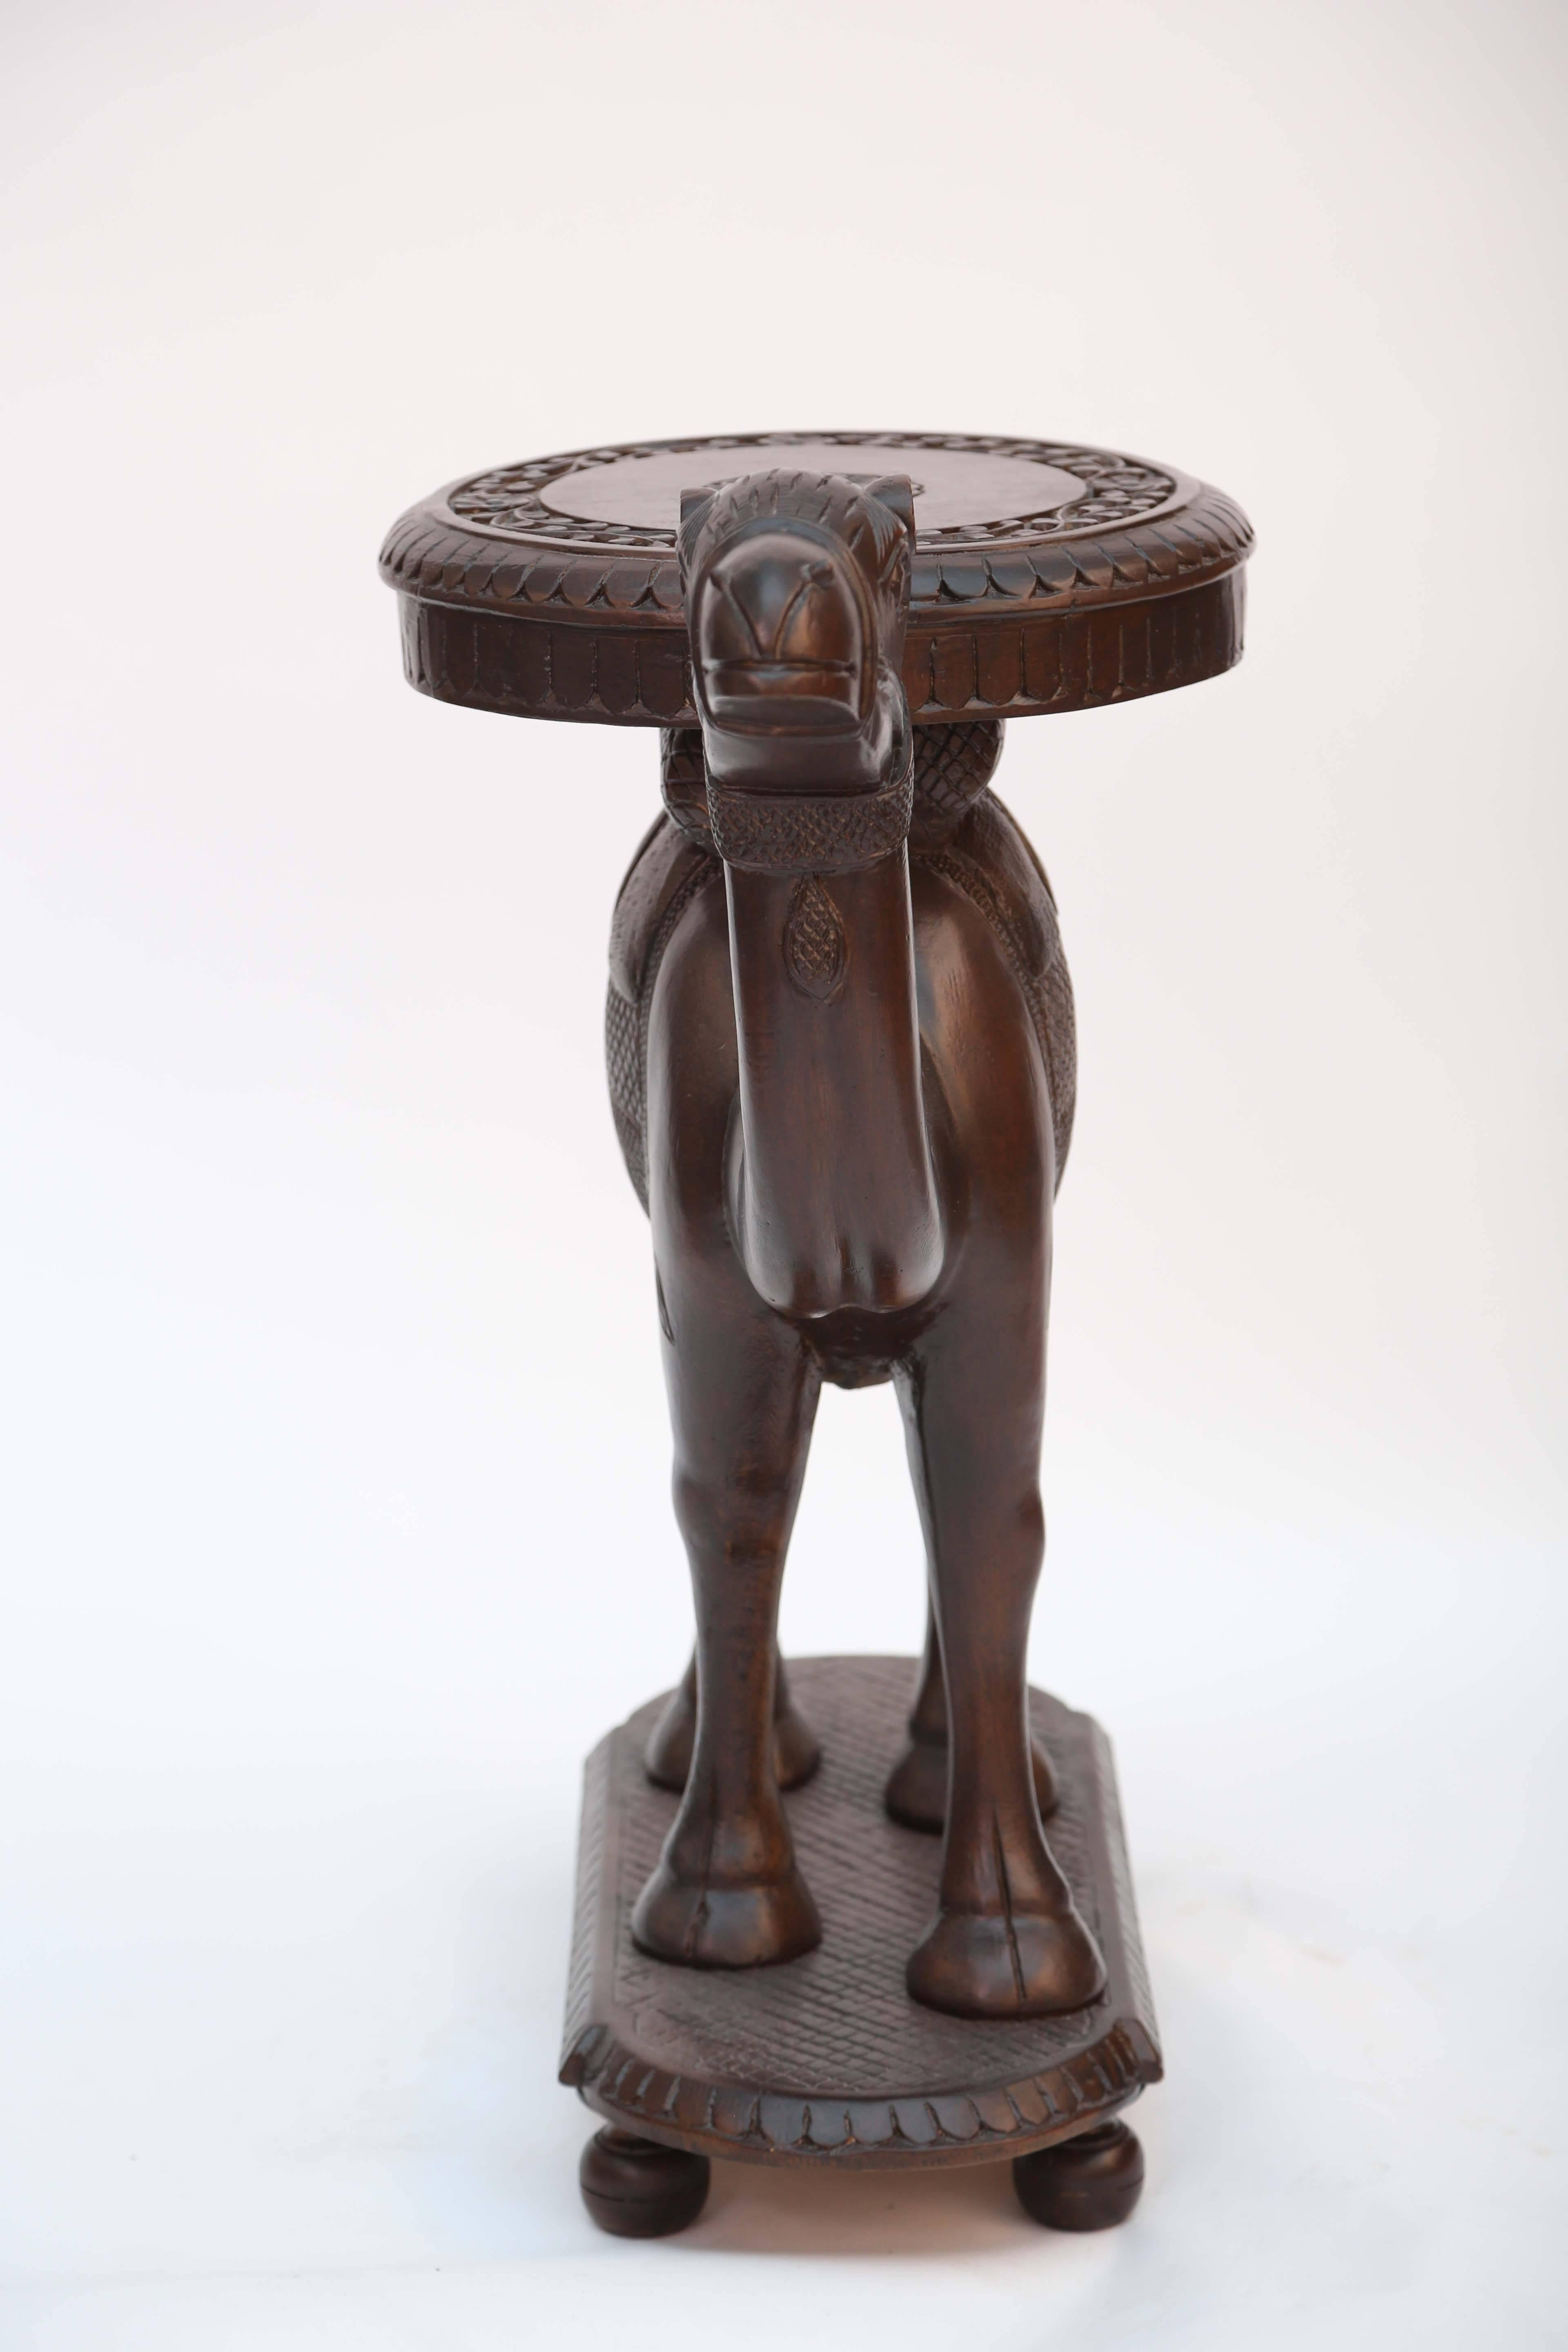 Anglo-Indian Style Camel Table by Chapman 1